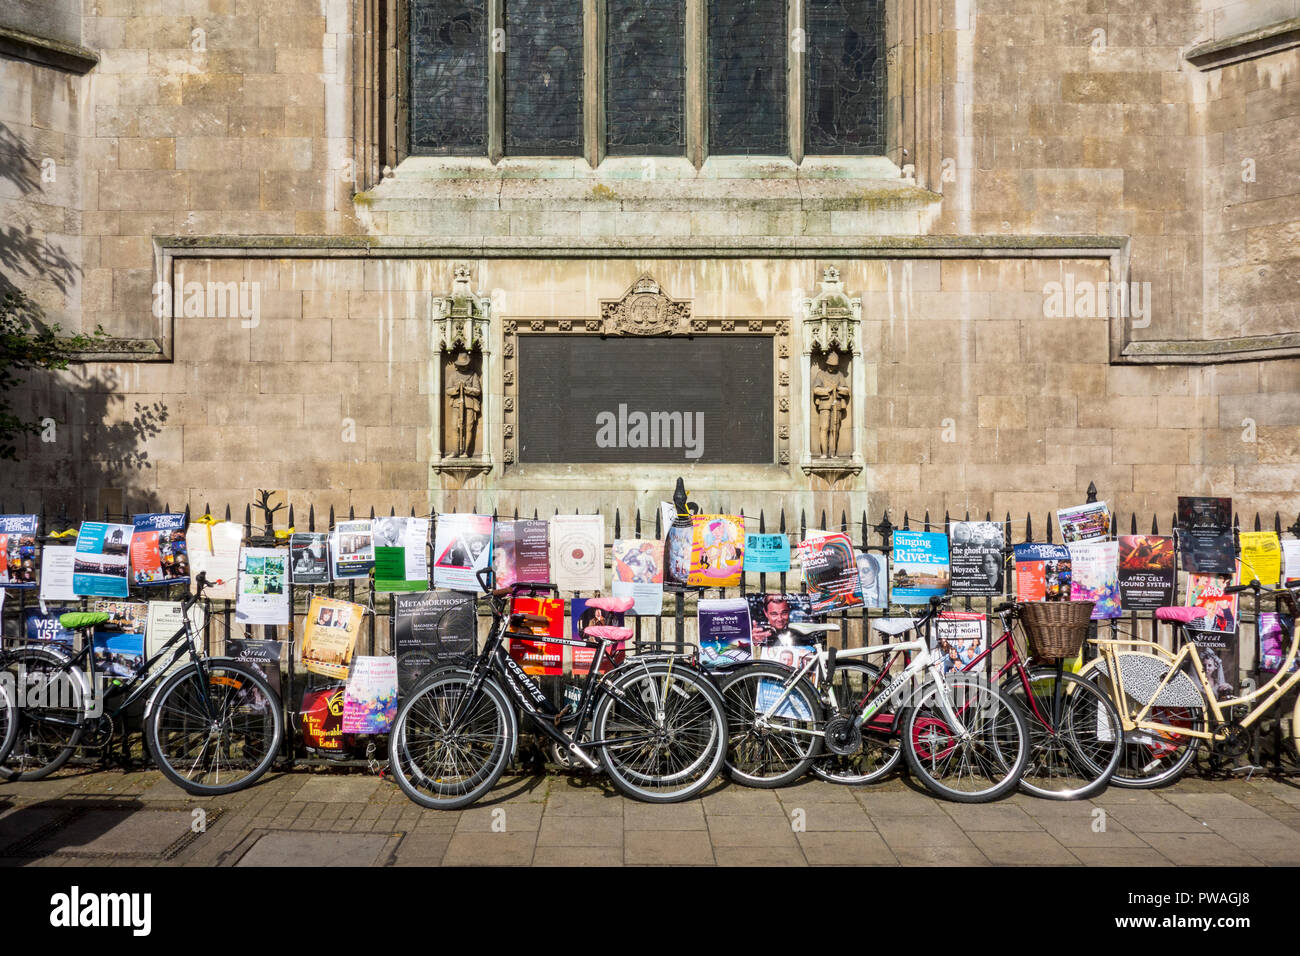 Bicycles chained to railings surrounded by posters or flyers outside Great St Mary's Church, Cambridge, UK Stock Photo